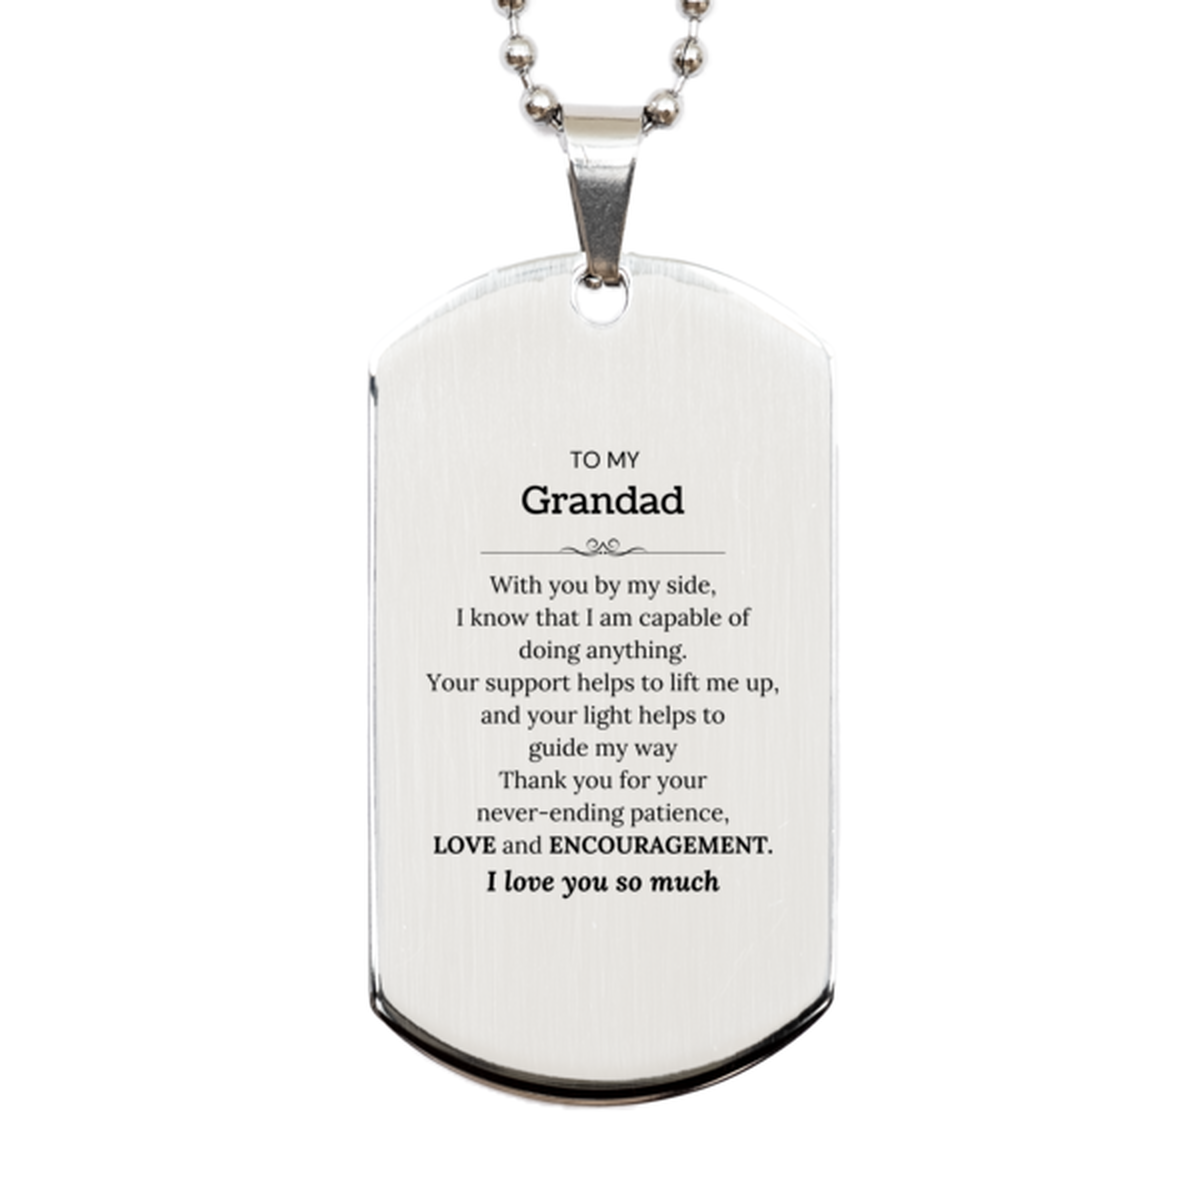 Appreciation Grandad Silver Dog Tag Gifts, To My Grandad Birthday Christmas Wedding Keepsake Gifts for Grandad With you by my side, I know that I am capable of doing anything. I love you so much